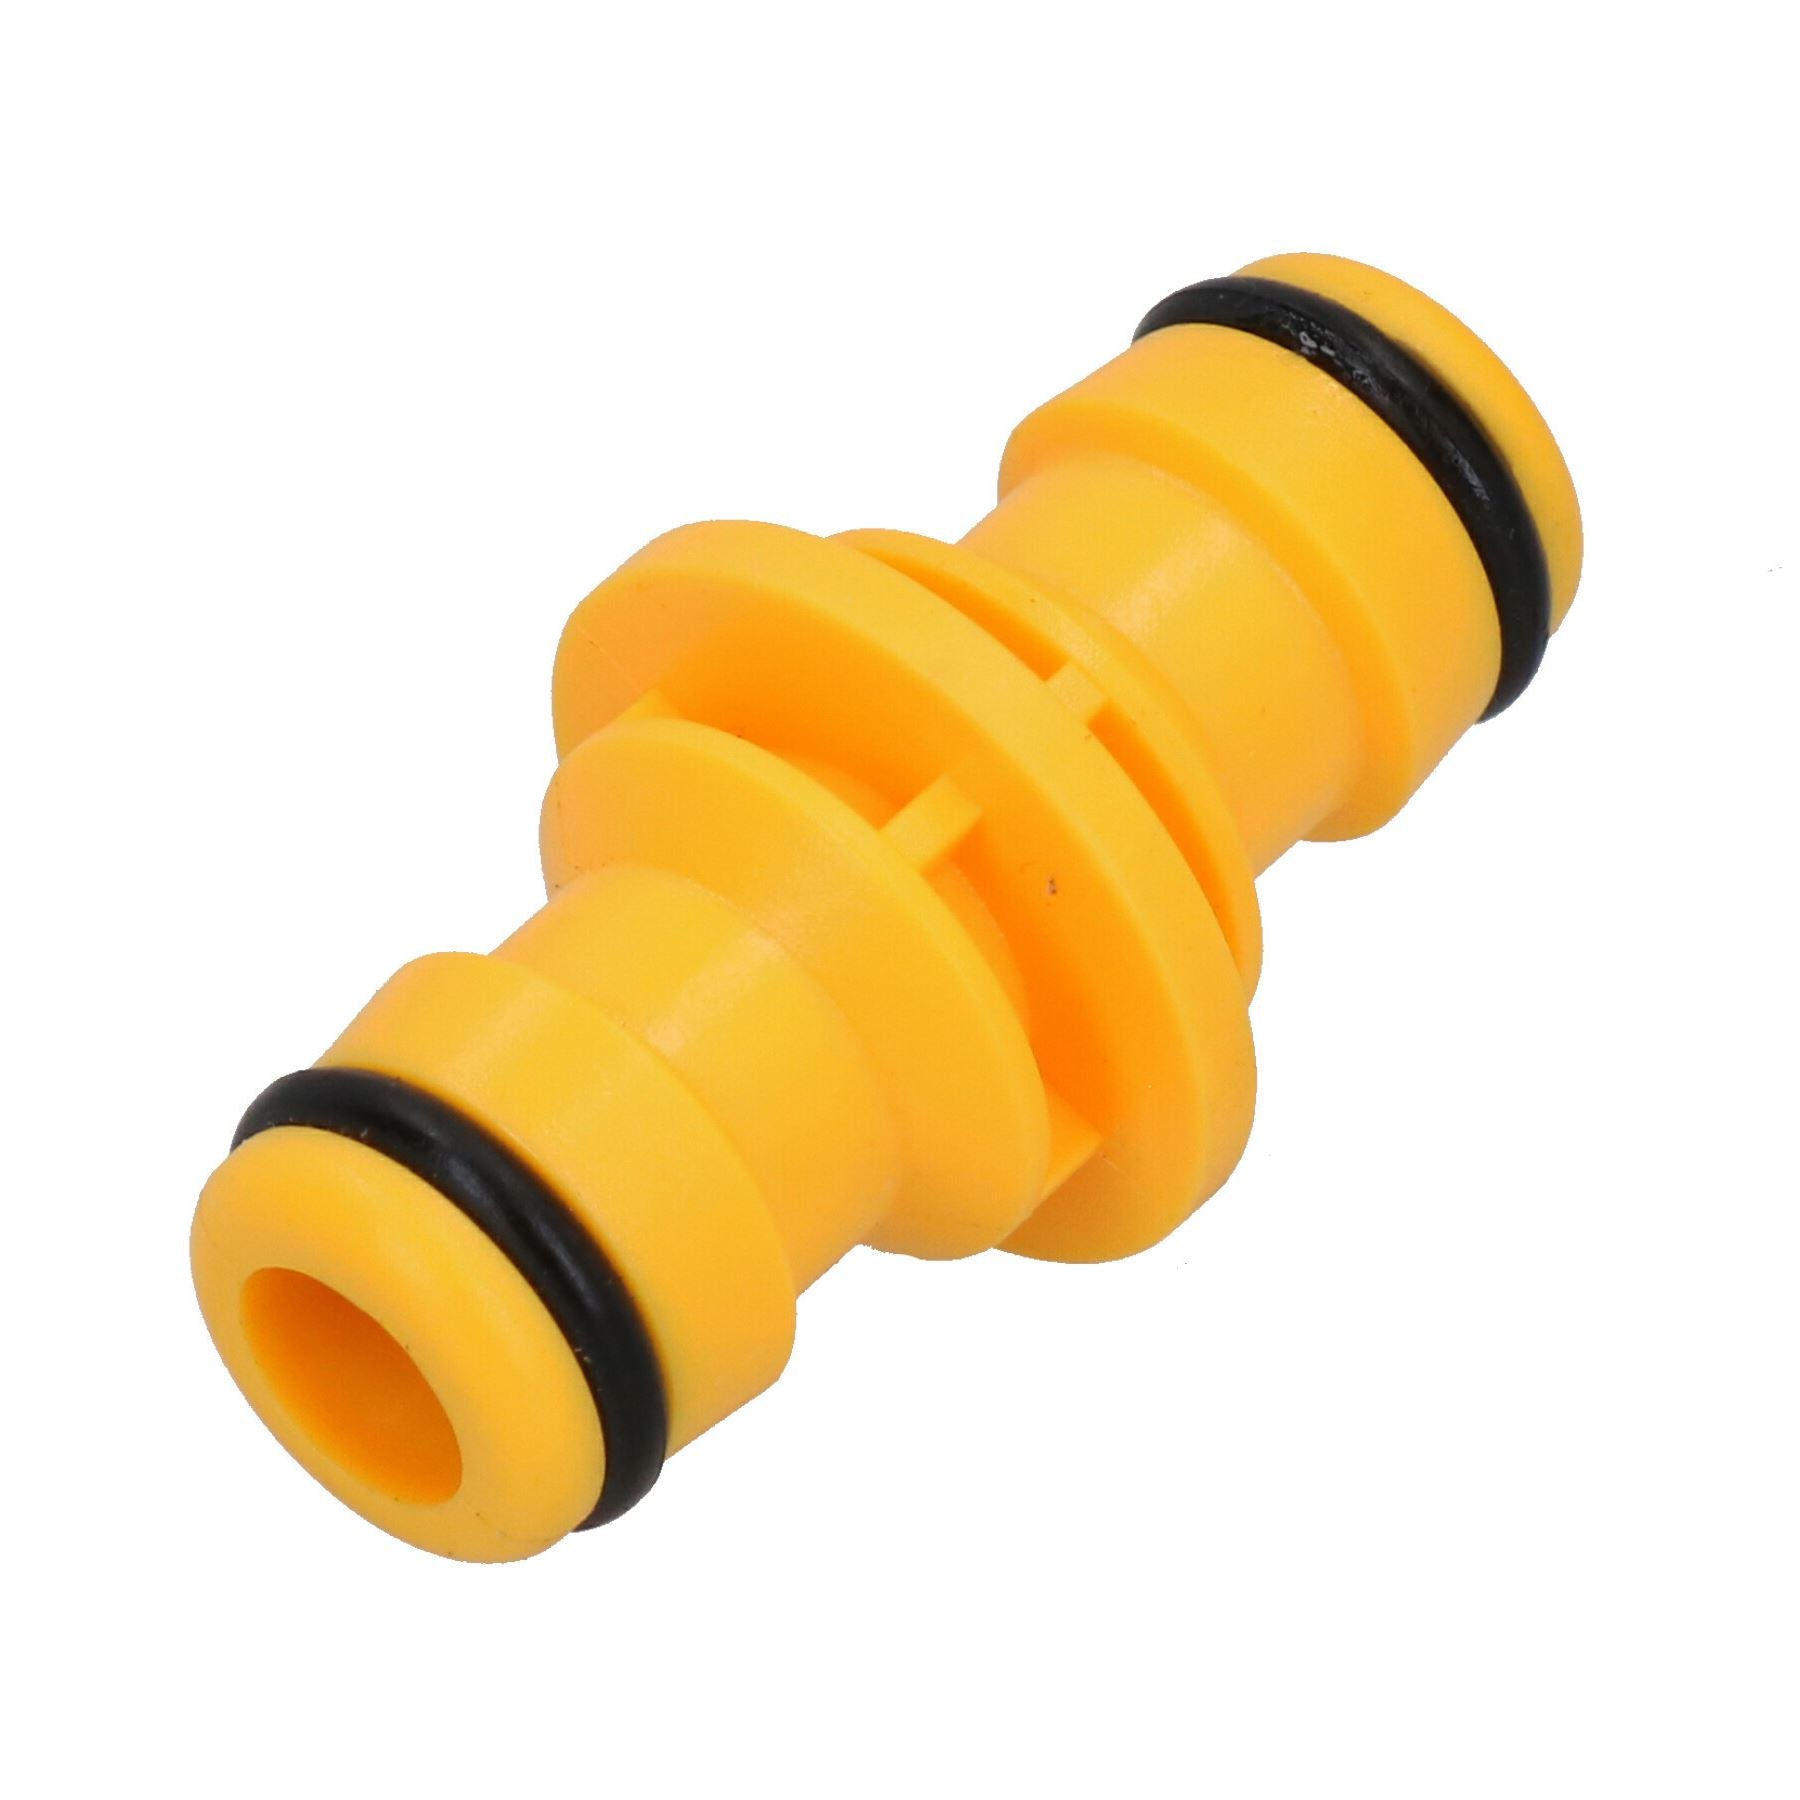 2 Way Male Straight Garden Hose Water Pipe Connector Fast Joiner Coupler